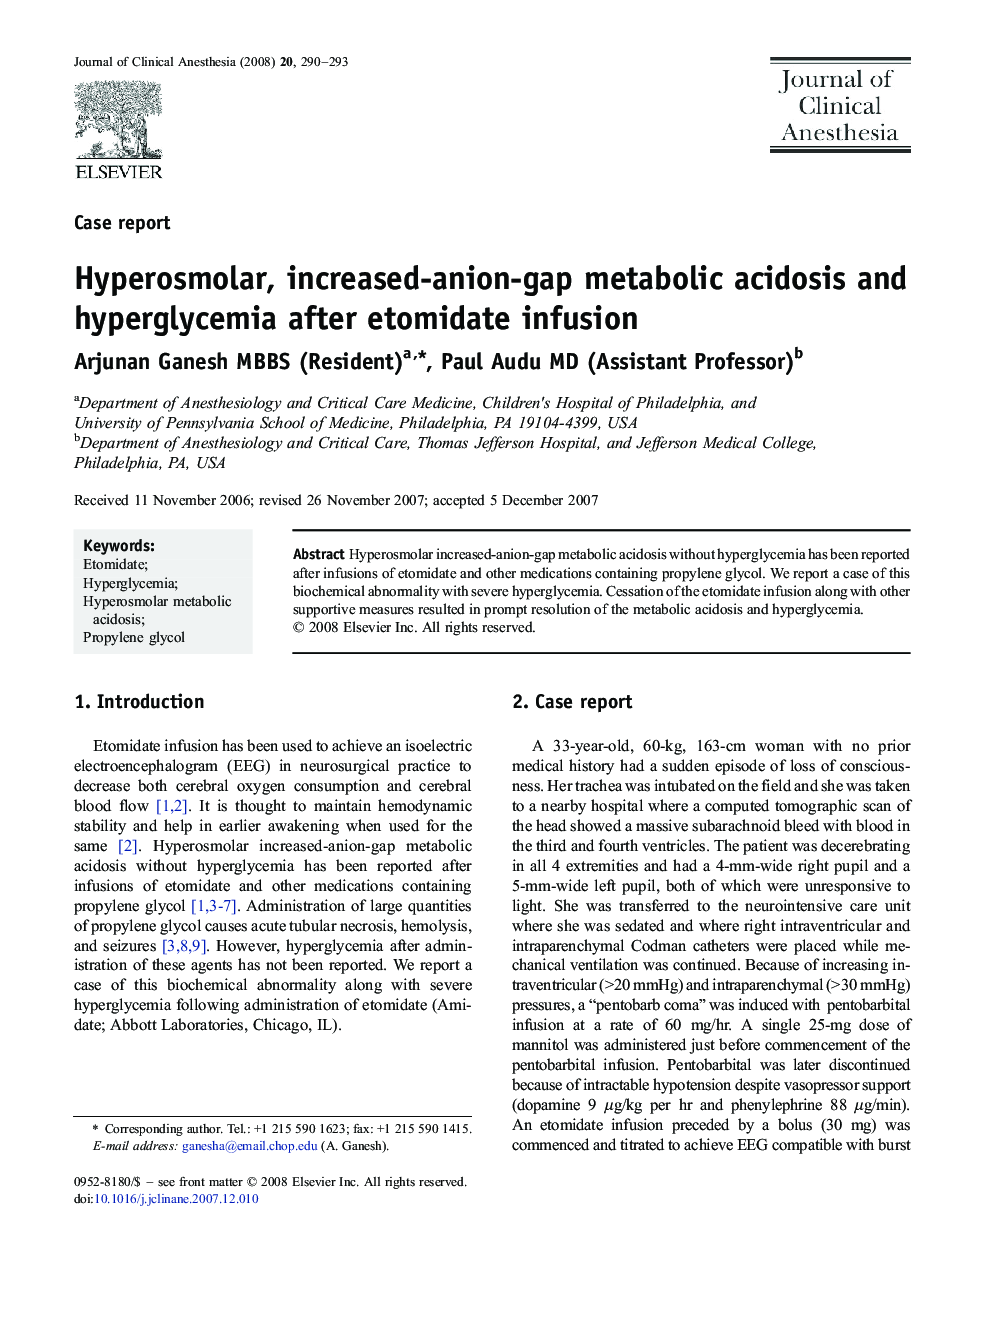 Hyperosmolar, increased-anion-gap metabolic acidosis and hyperglycemia after etomidate infusion